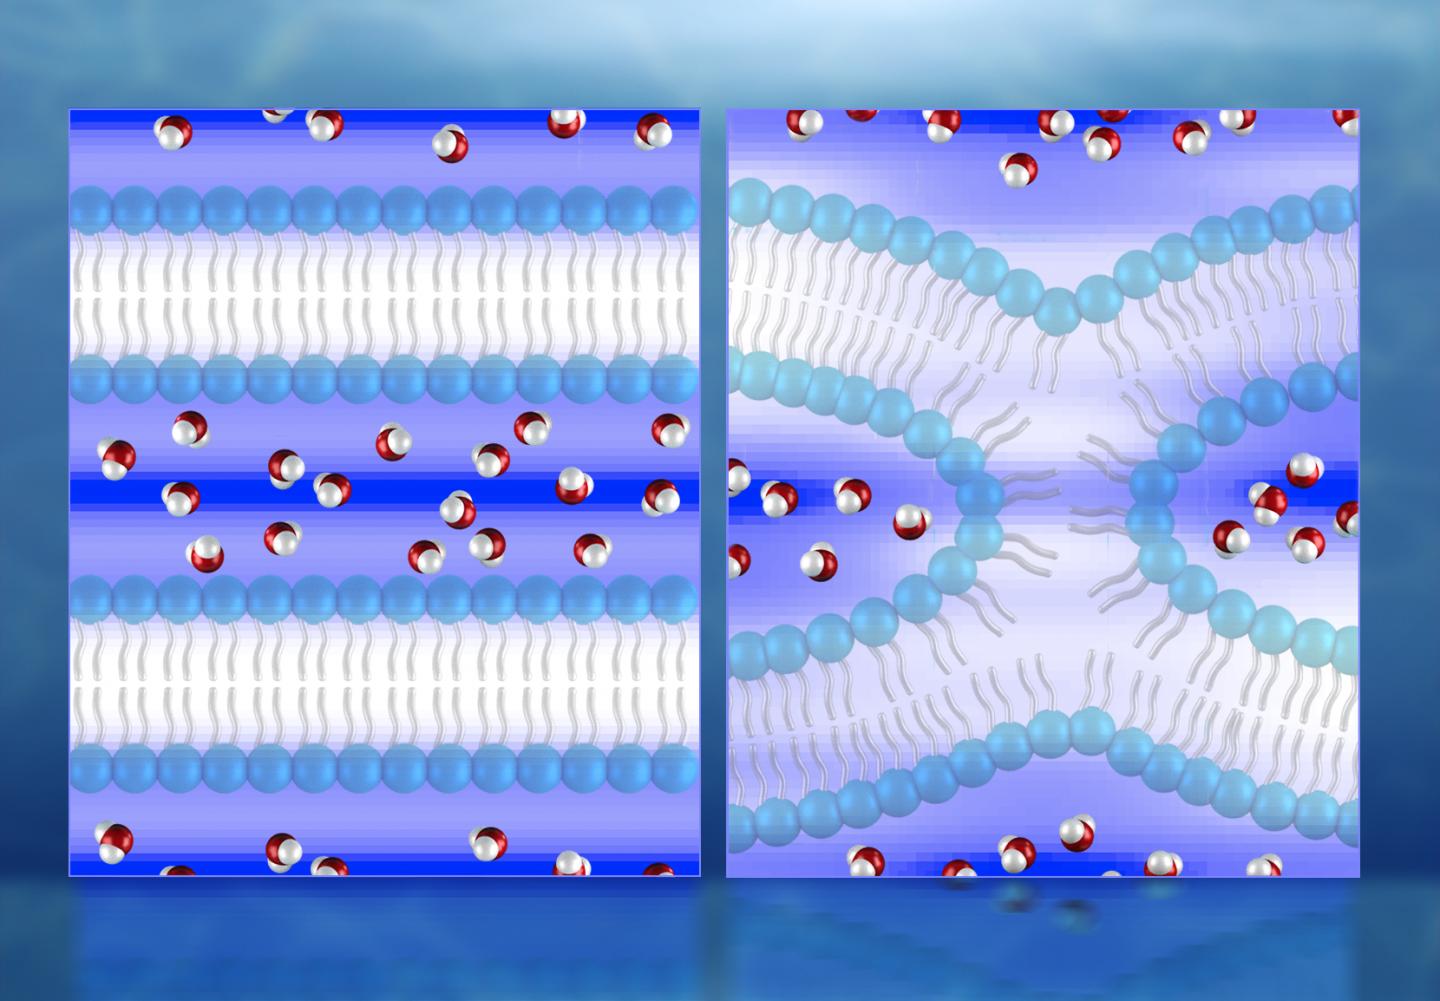 Water Distribution near Lipid Bilayers before and during Cell Fusion